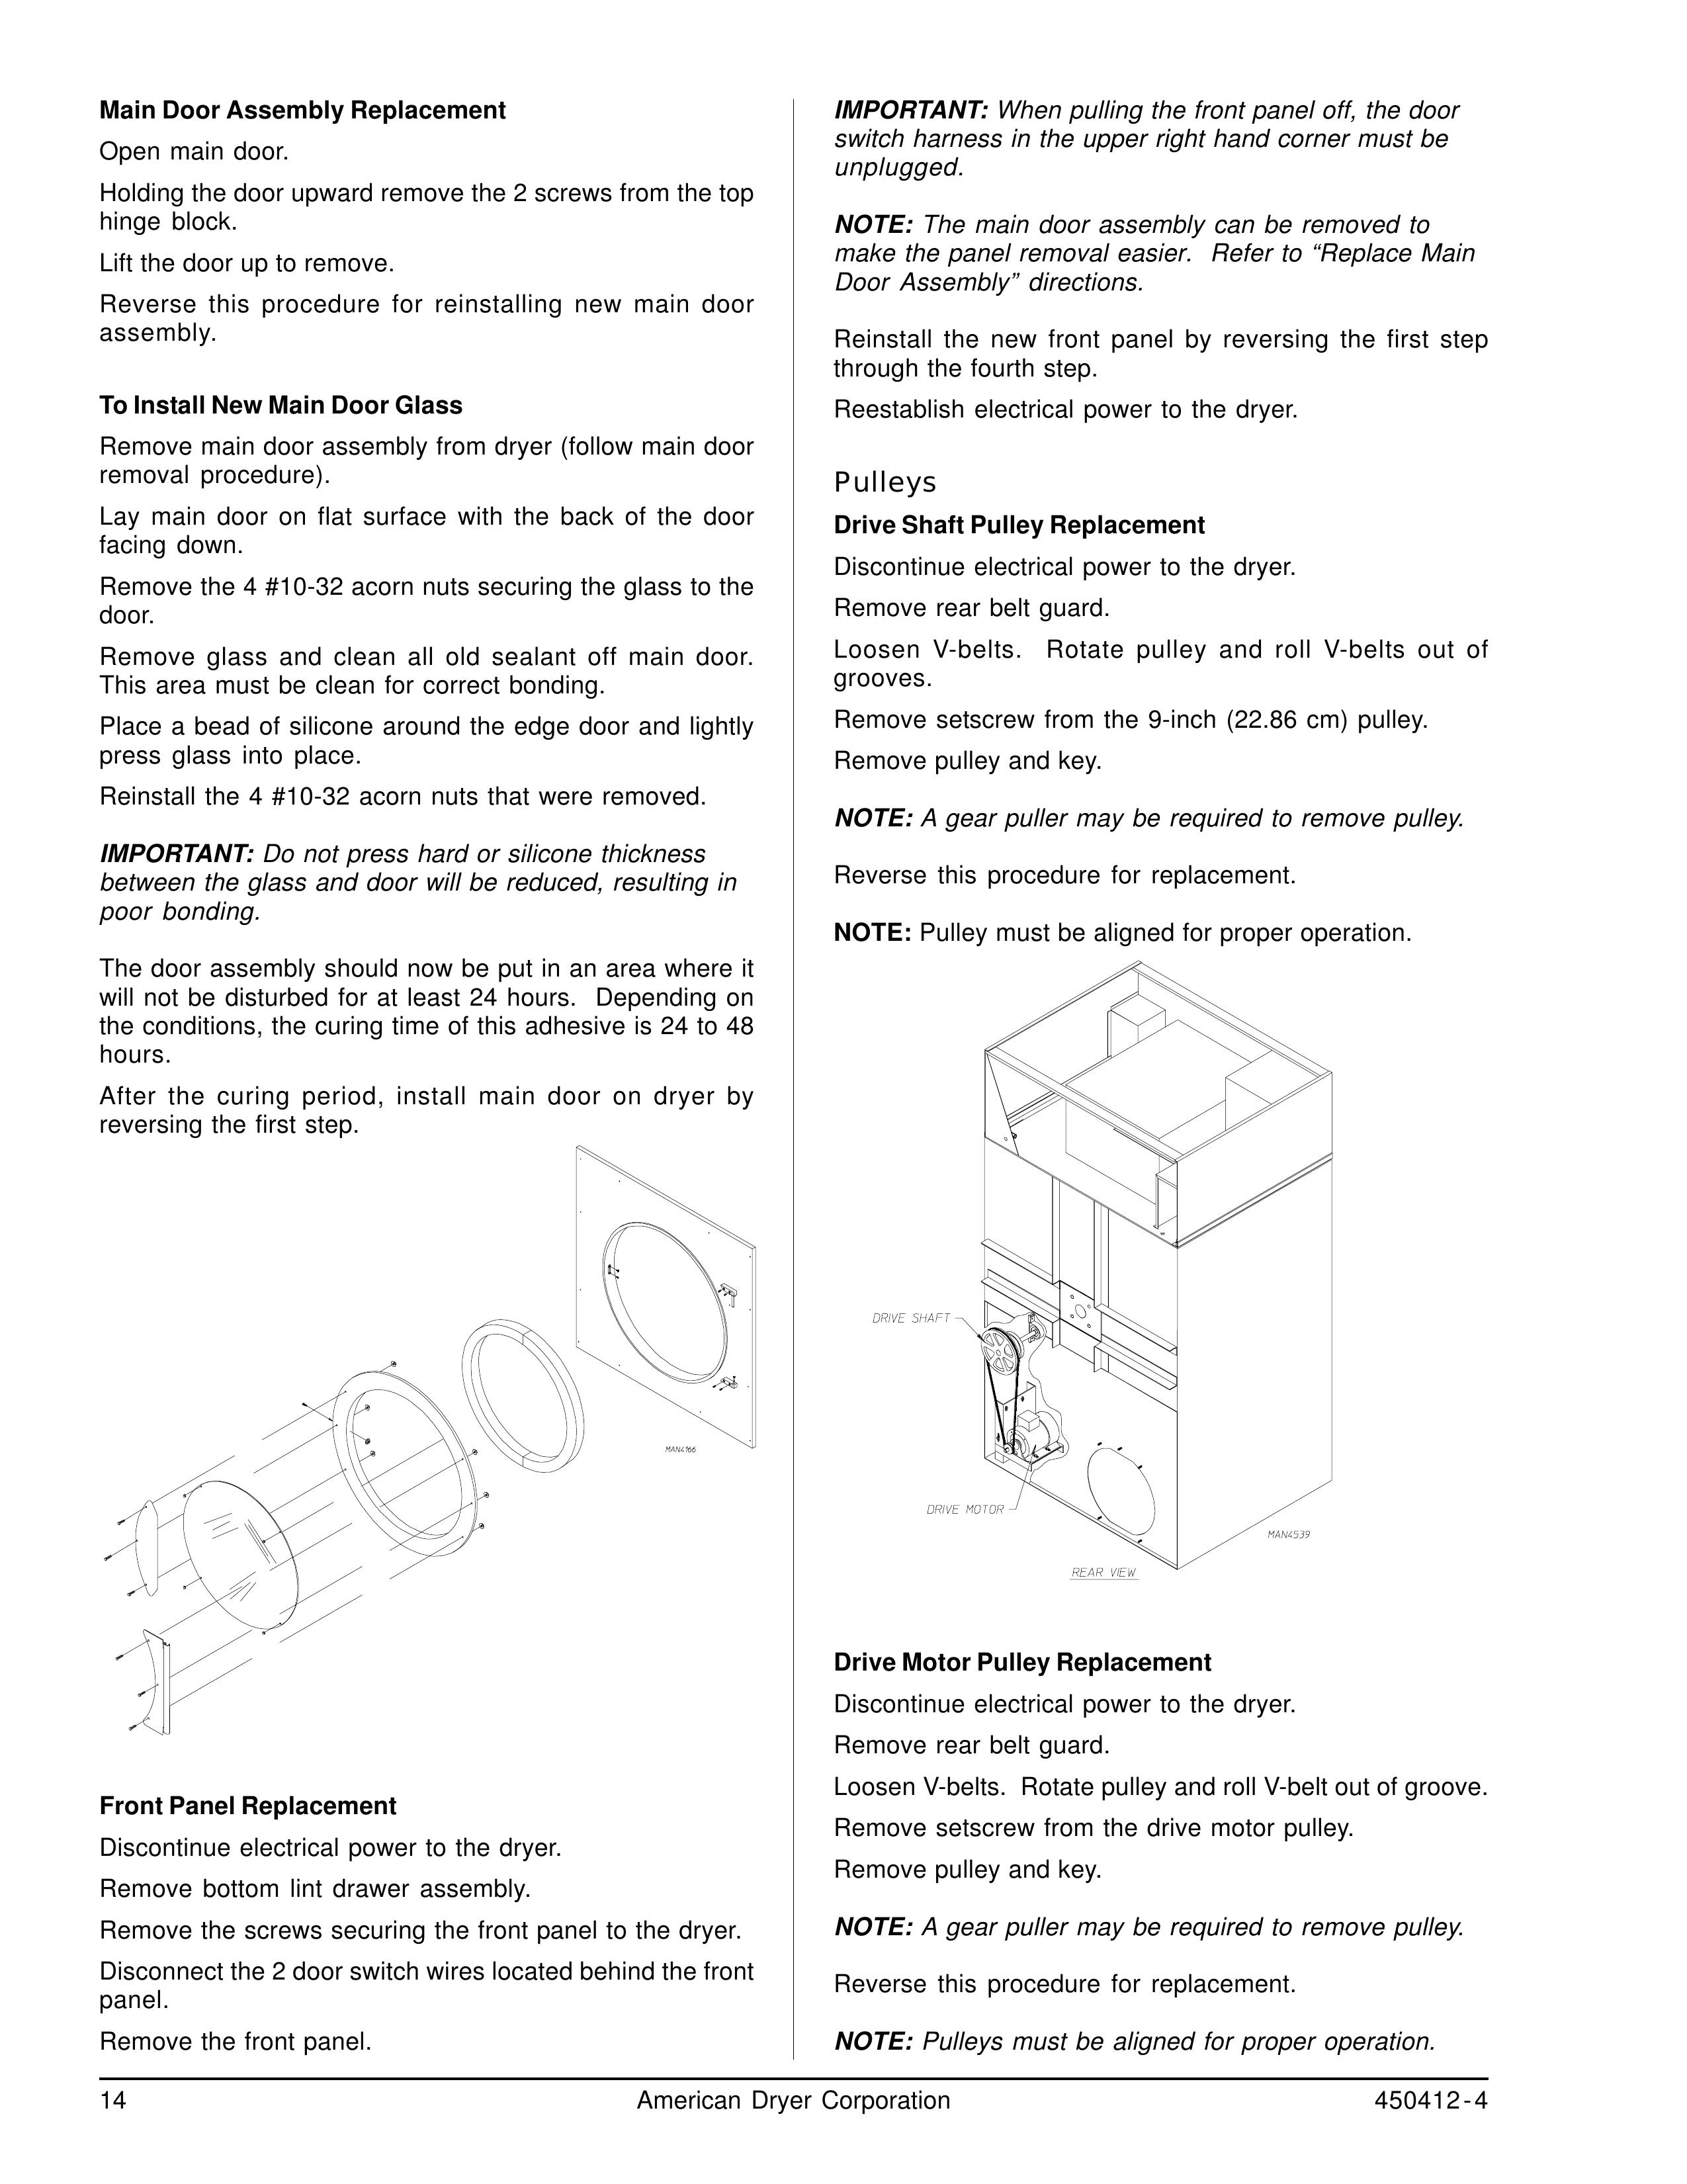 ADC ML-122 Clothes Dryer User Manual (Page 14)